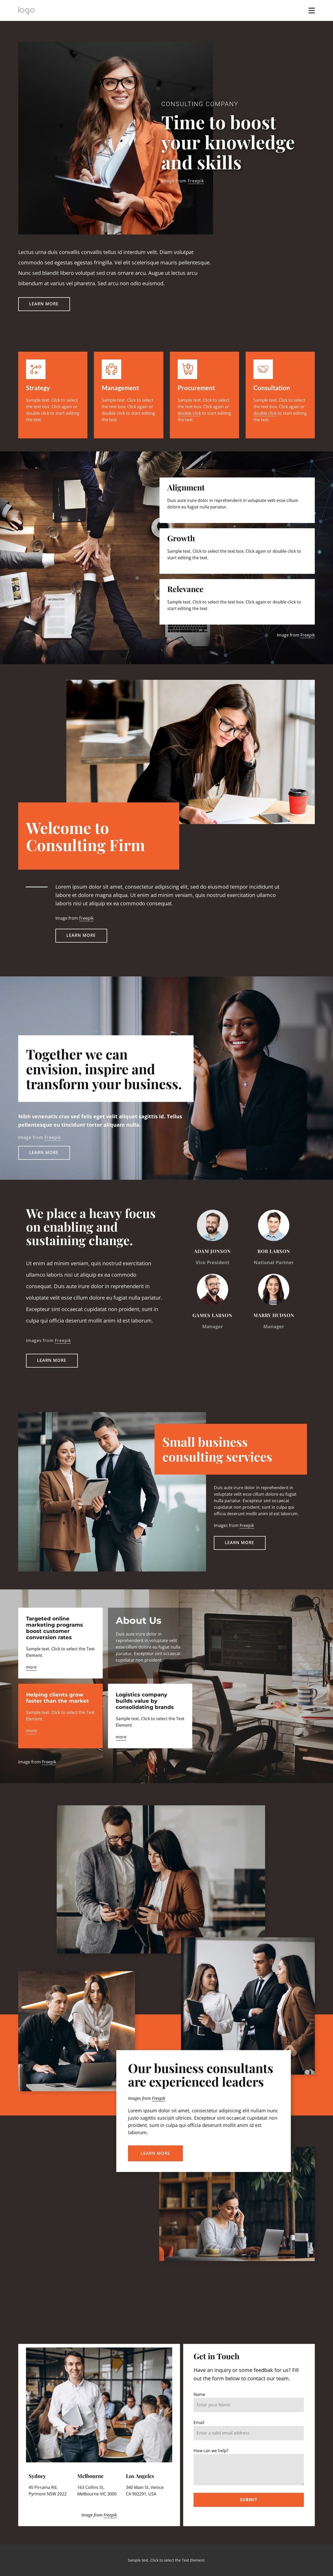 Рlan out your learning journey HTML5 Template